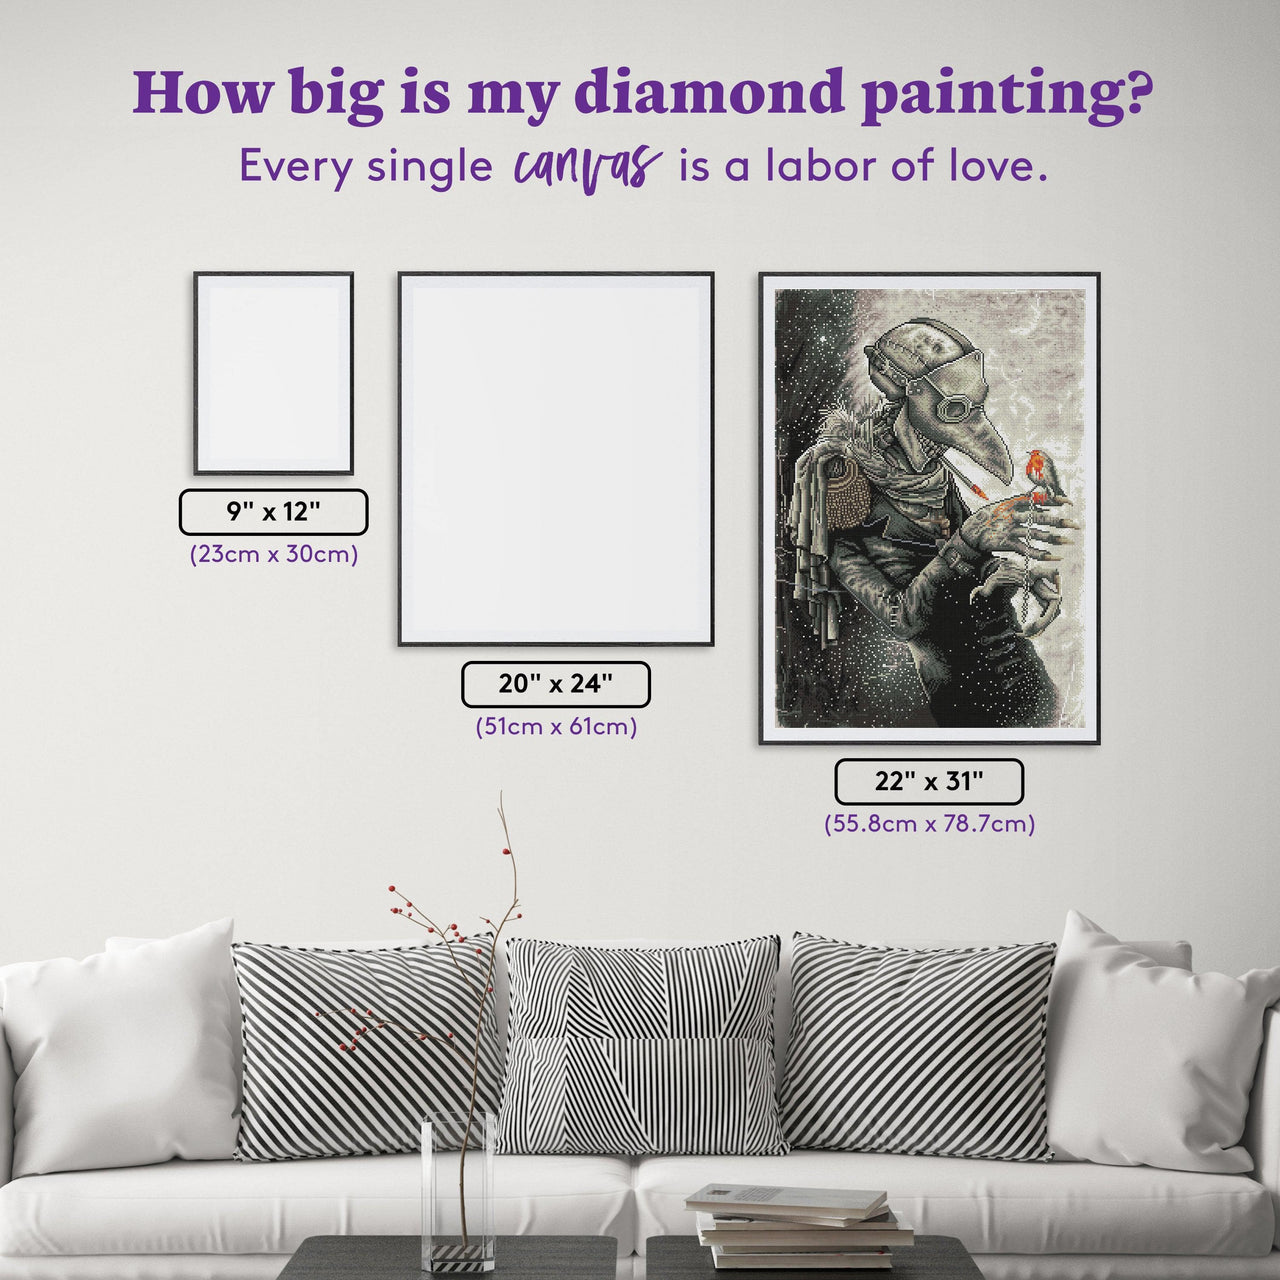 Diamond Painting Plague Dr 22" x 31" (55.8cm x 78.7cm) / Round with 19 Colors including 2 ABs / 55,919